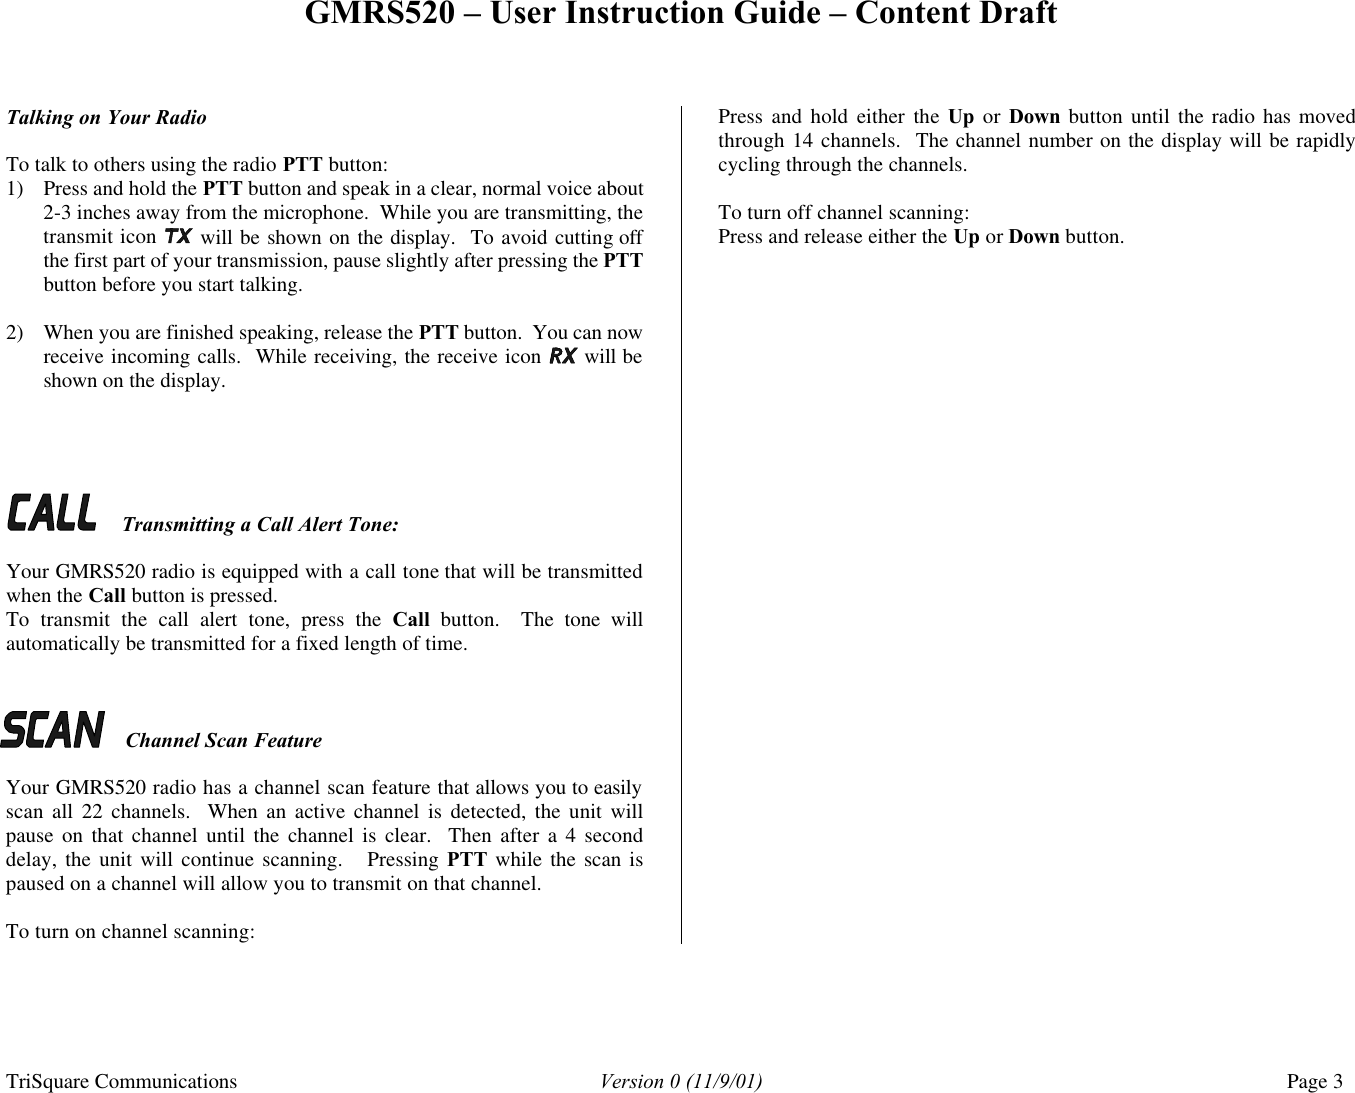 GMRS520 – User Instruction Guide – Content Draft TriSquare Communications Version 0 (11/9/01) Page 3  Talking on Your Radio   To talk to others using the radio PTT button: 1) Press and hold the PTT button and speak in a clear, normal voice about 2-3 inches away from the microphone.  While you are transmitting, the transmit icon   will be shown on the display.  To avoid cutting off the first part of your transmission, pause slightly after pressing the PTT button before you start talking.  2) When you are finished speaking, release the PTT button.  You can now receive incoming calls.  While receiving, the receive icon   will be shown on the display.       Transmitting a Call Alert Tone:  Your GMRS520 radio is equipped with a call tone that will be transmitted when the Call button is pressed.    To transmit the call alert tone, press the Call button.  The tone will automatically be transmitted for a fixed length of time.      Channel Scan Feature  Your GMRS520 radio has a channel scan feature that allows you to easily scan all 22 channels.  When an active channel is detected, the unit will pause on that channel until the channel is clear.  Then after a 4 second delay, the unit will continue scanning.   Pressing PTT while the scan is paused on a channel will allow you to transmit on that channel.    To turn on channel scanning: Press and hold either the  Up  or Down button until the radio has moved through 14 channels.  The channel number on the display will be rapidly cycling through the channels.  To turn off channel scanning: Press and release either the Up or Down button. 